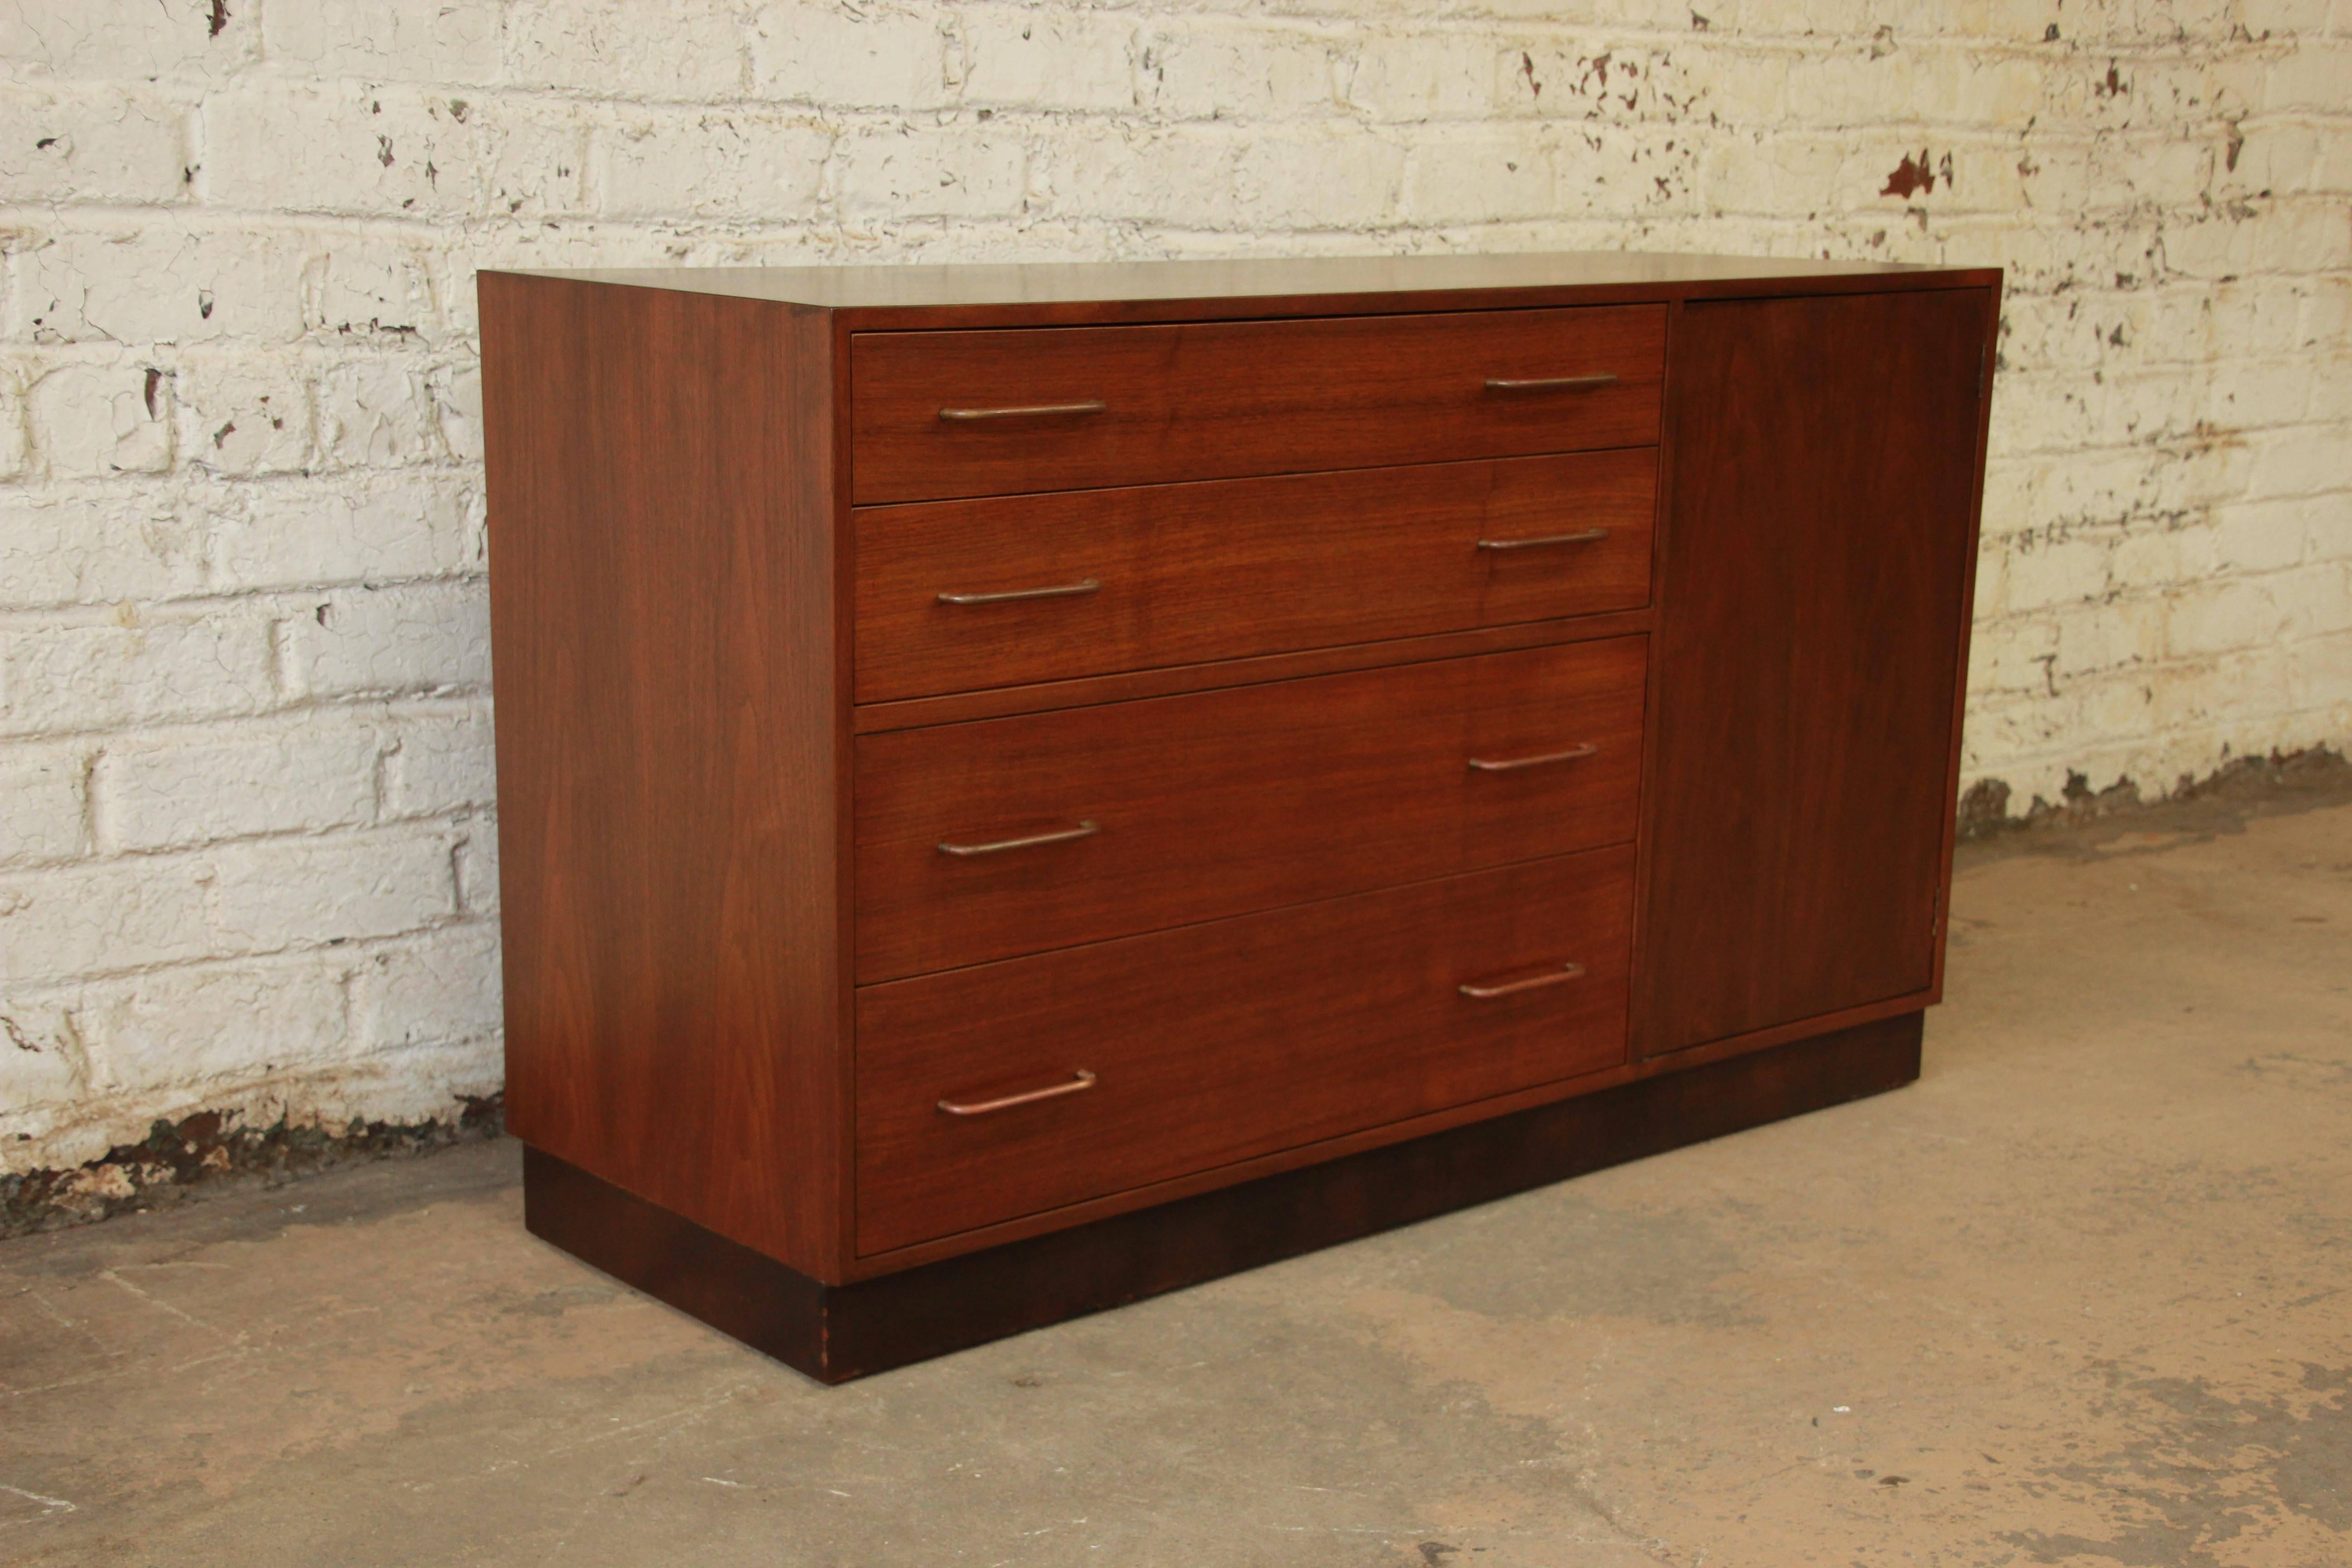 Sleek and stylish Mid-Century Modern sideboard buffet or credenza by Edward Wormley for Dunbar Furniture. The sideboard features clean Minimalist lines and gorgeous walnut wood grain. The walnut case rests on a leather plinth base. The sideboard